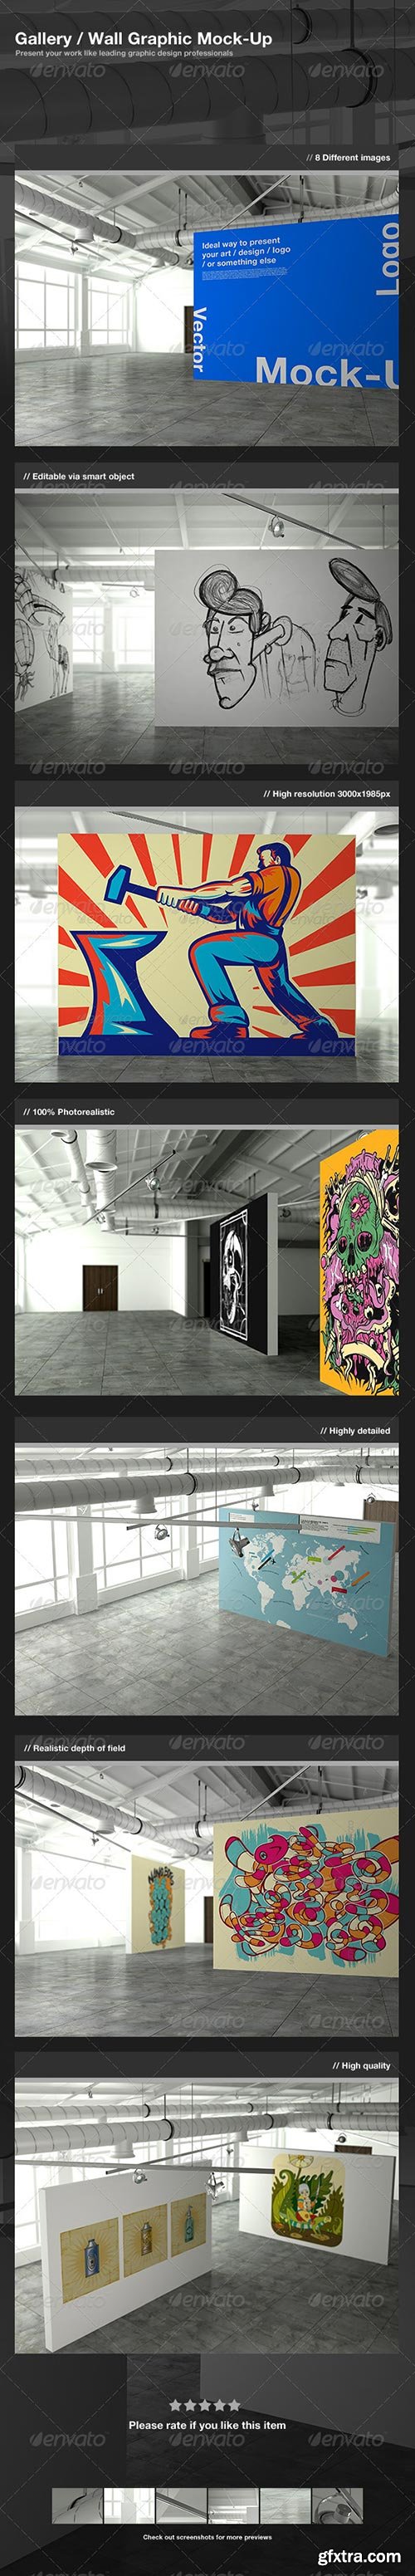 GraphicRiver - Gallery / Wall Graphic Mock-Up